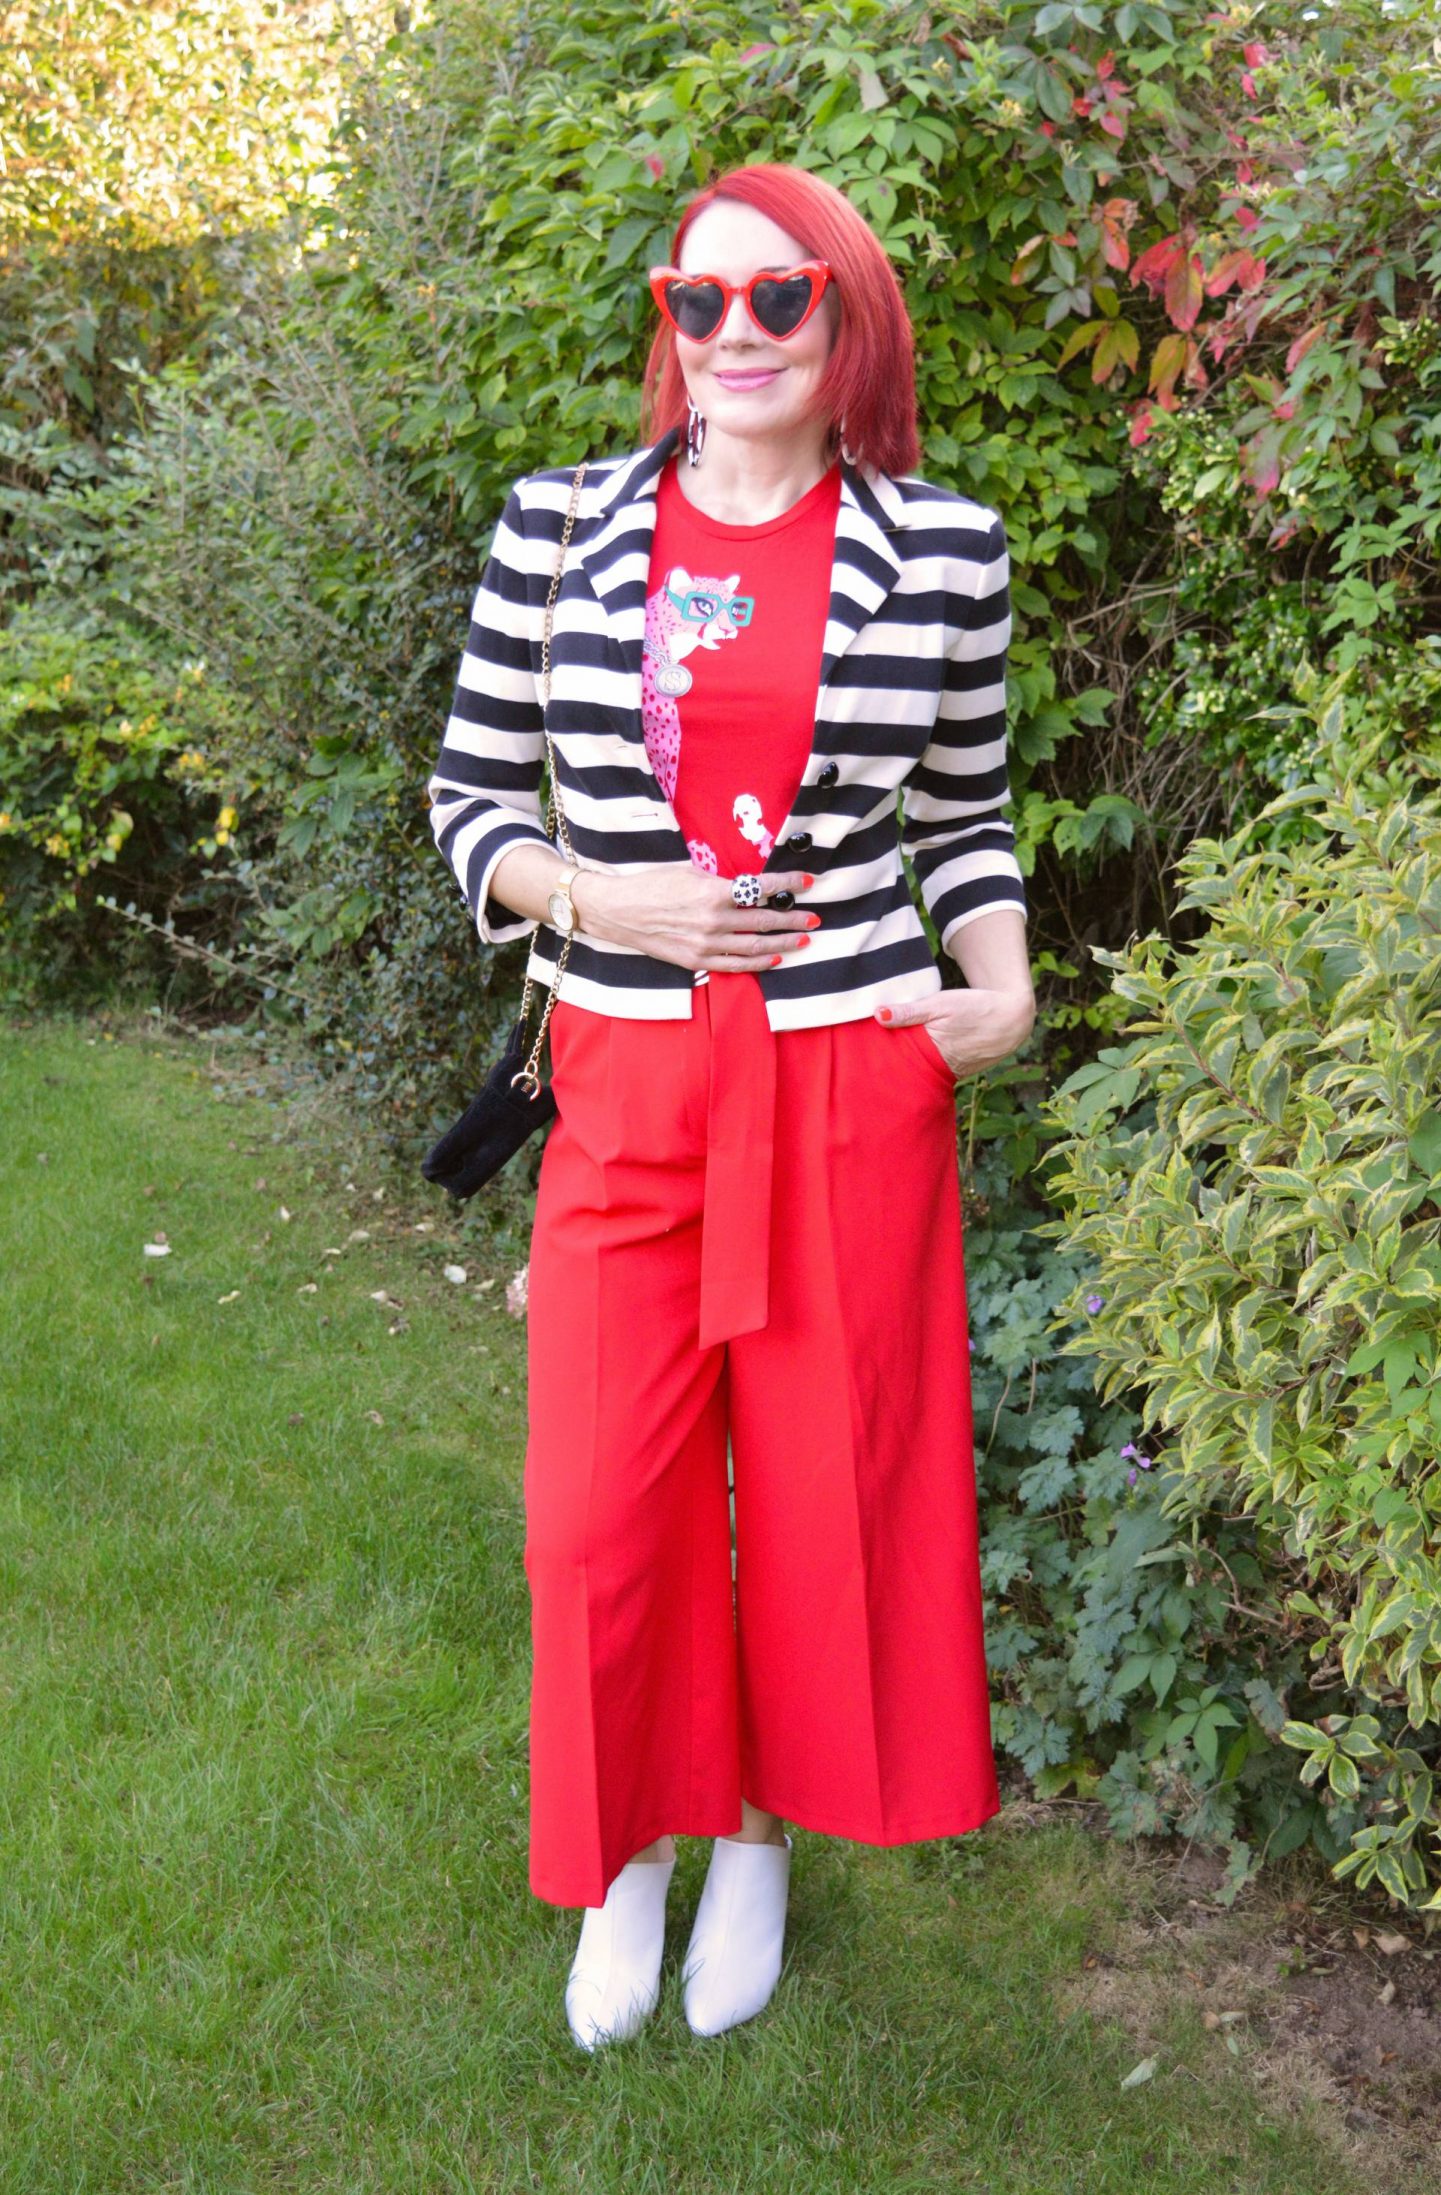 Simply Stripes - September's Thrifty Six, Marks & Spencer black and white striped jacket, Asos red culottes, Soul Sisters red cheetah T-shirt, River Island white shoe boots, red heart sunglasses